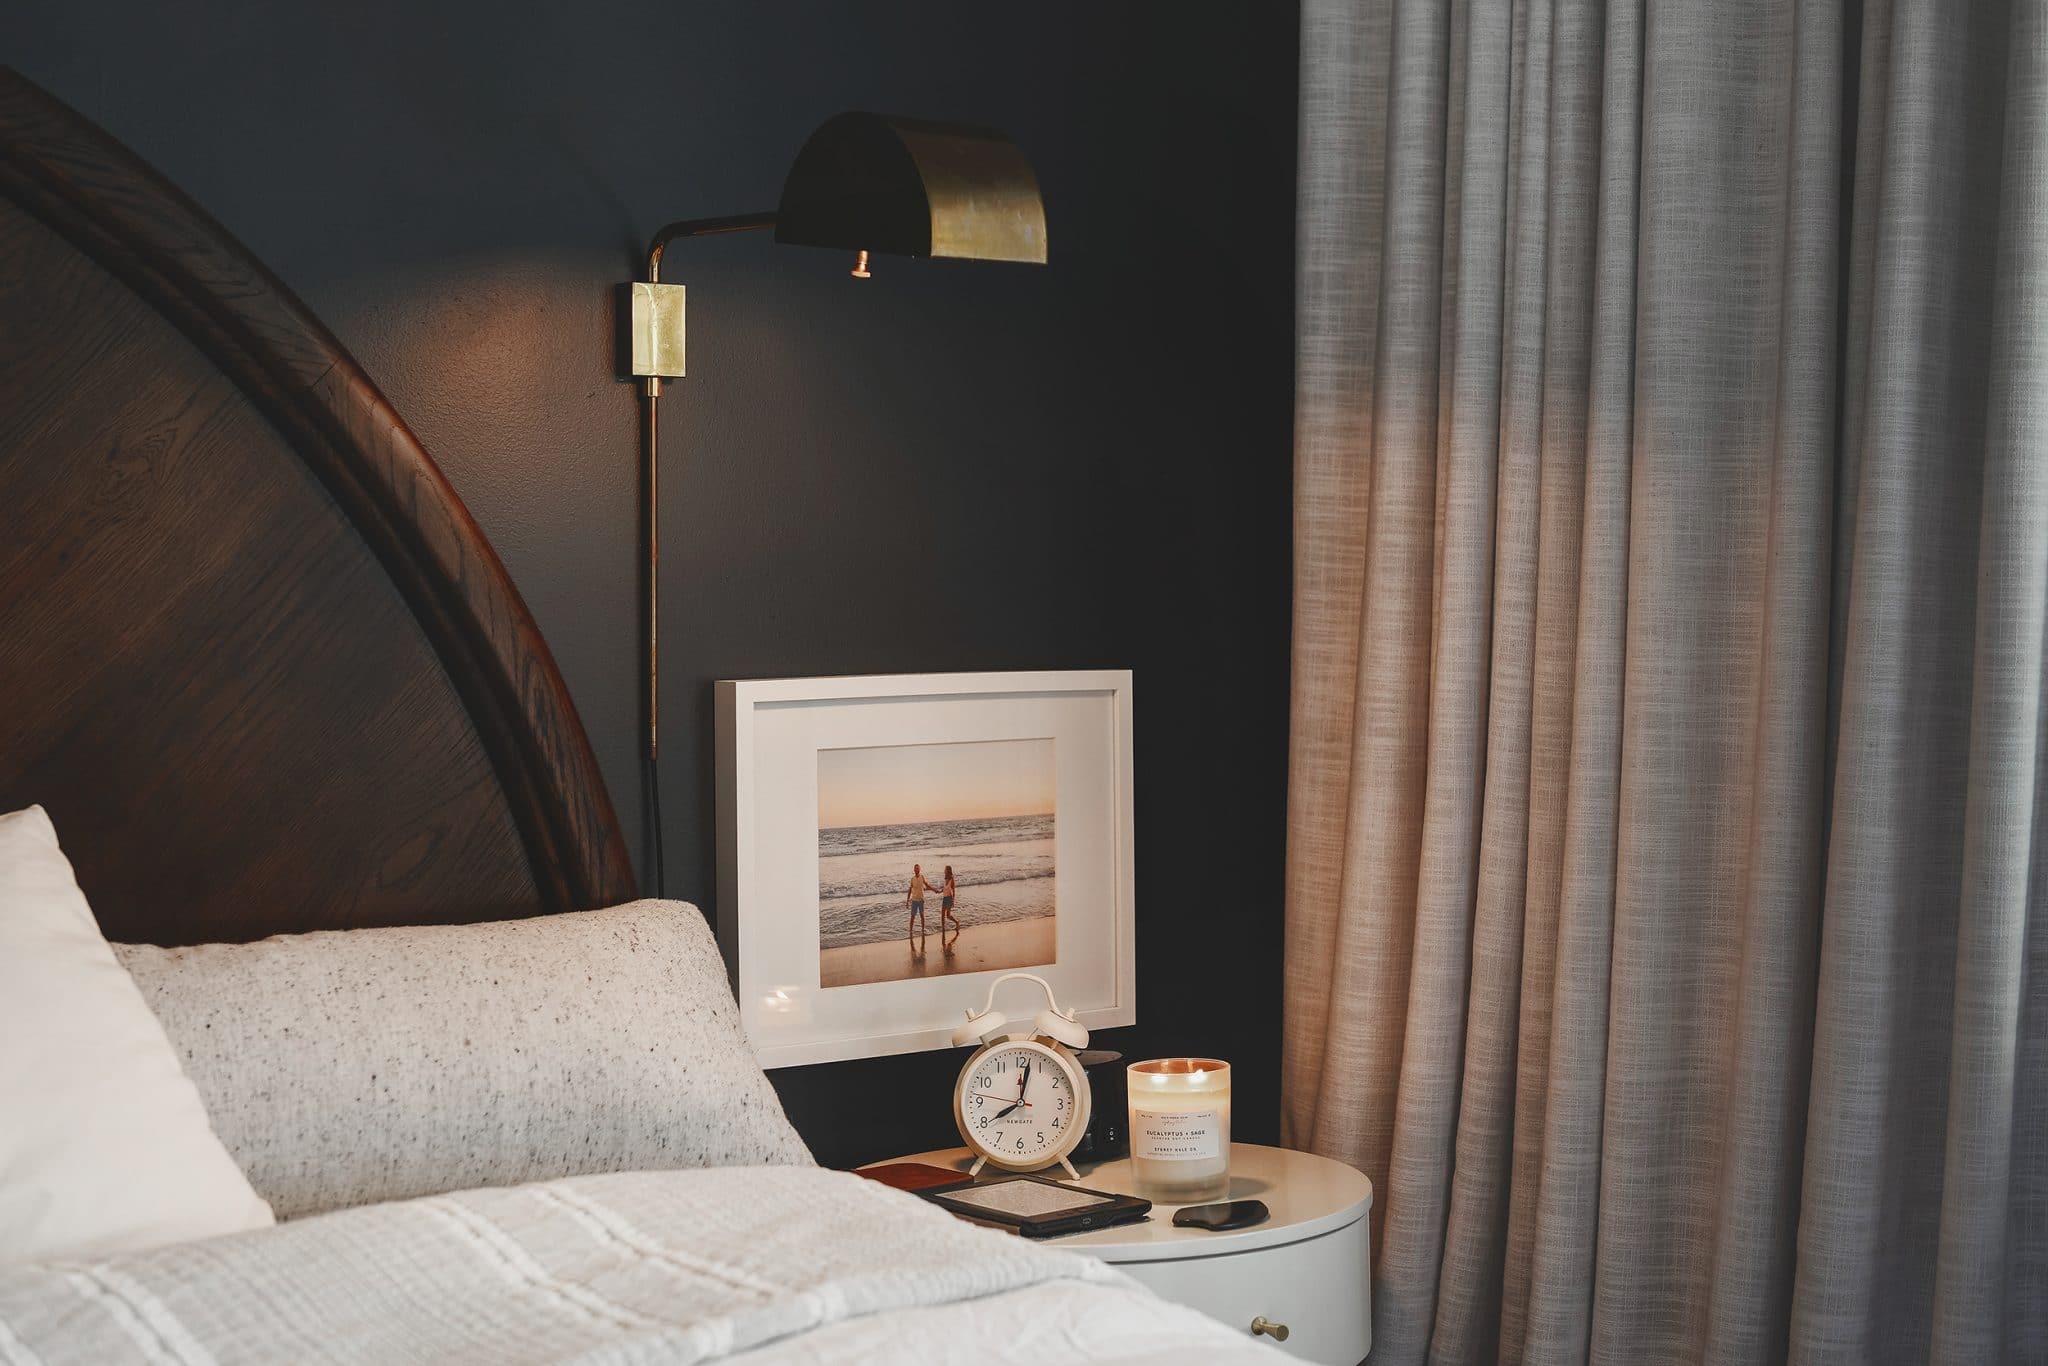 Moody bedroom scene with a candle burning on the night stand | the scents that fill our home, via Yellow Brick Home